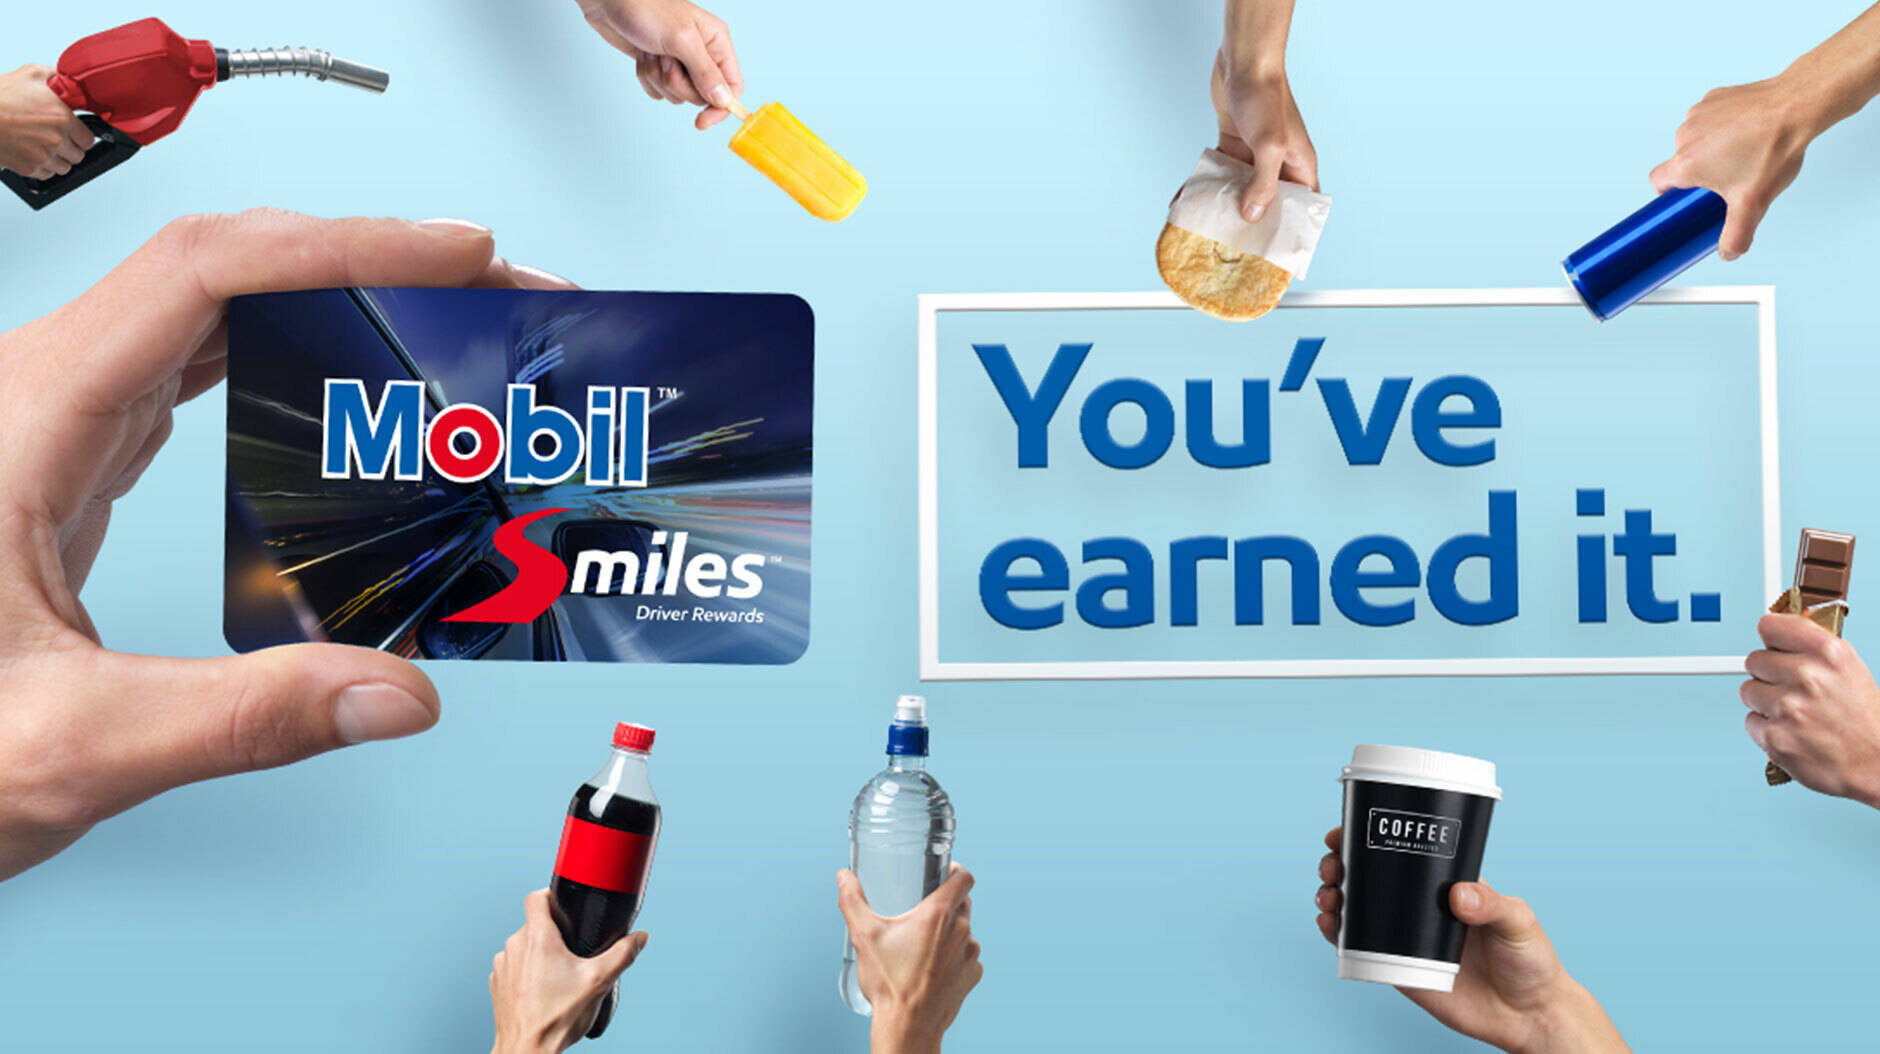 Image Photo  Mobil Smiles Driver Rewards is a driver rewards programme that rewards loyal consumers for shopping at Mobil.